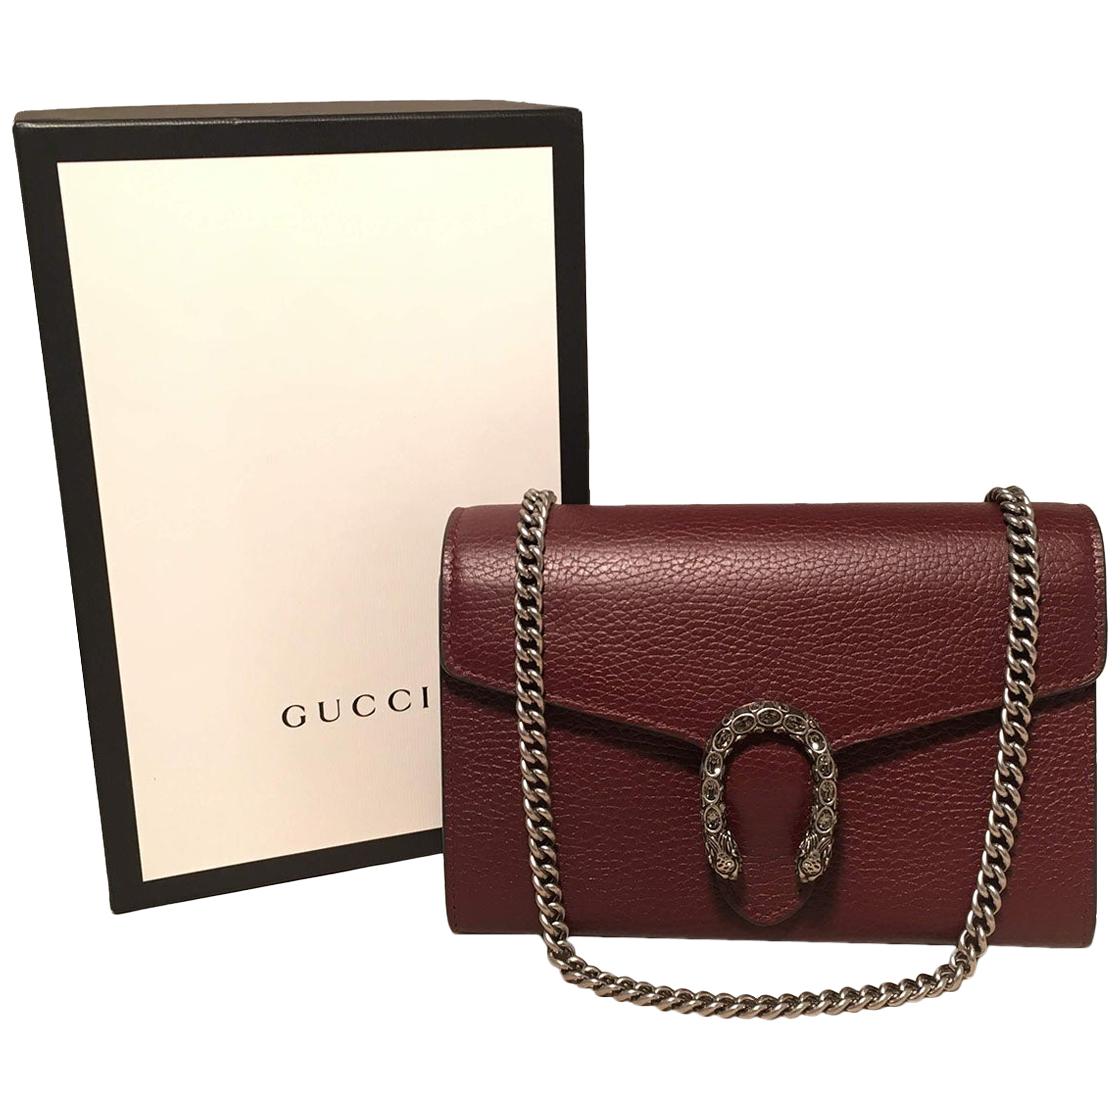 NWOT Gucci Dionysus Maroon Pebbled Leather Mini Chain Serpent Wallet Clutch Bag